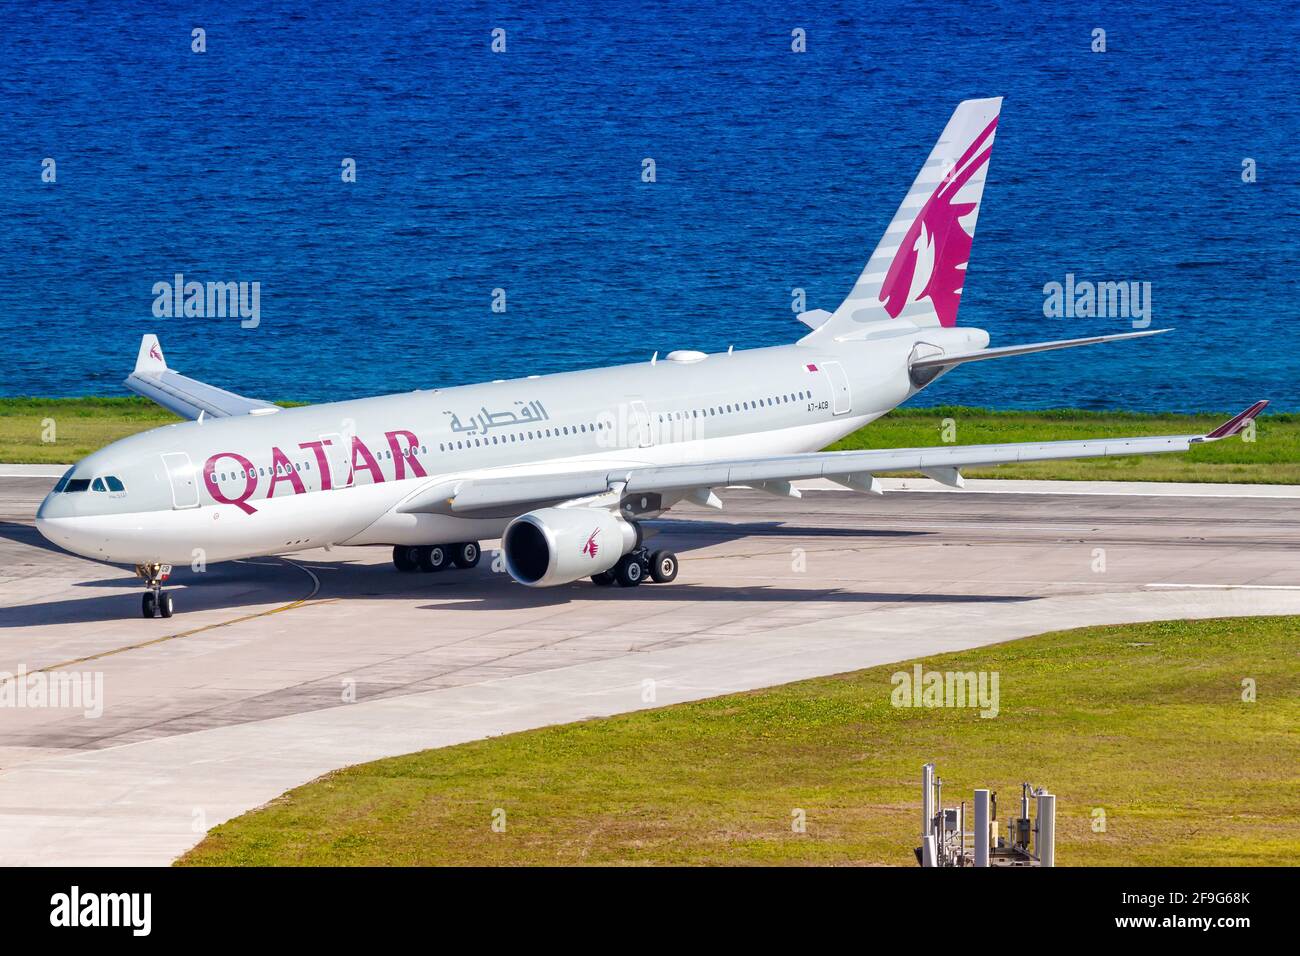 Mahe, Seychelles - November 26, 2017: Qatar Airways Airbus A330 airplane at Seychelles International Airport (SEZ) in the Seychelles. Airbus is a Euro Stock Photo